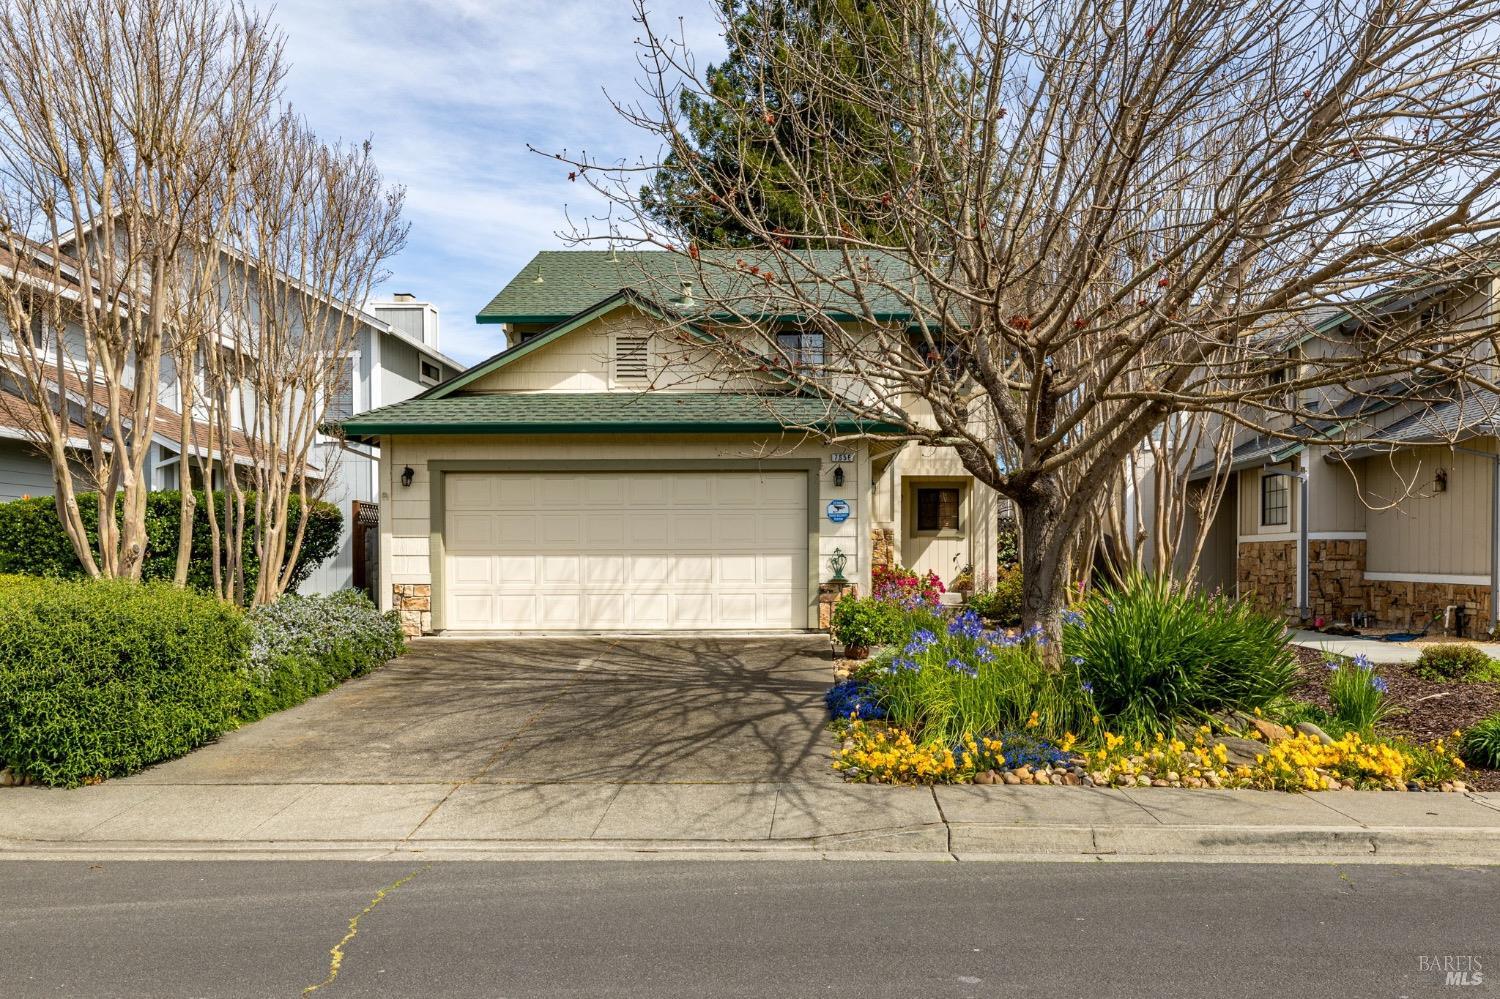 Photo of 7856 Medallion Wy in Rohnert Park, CA